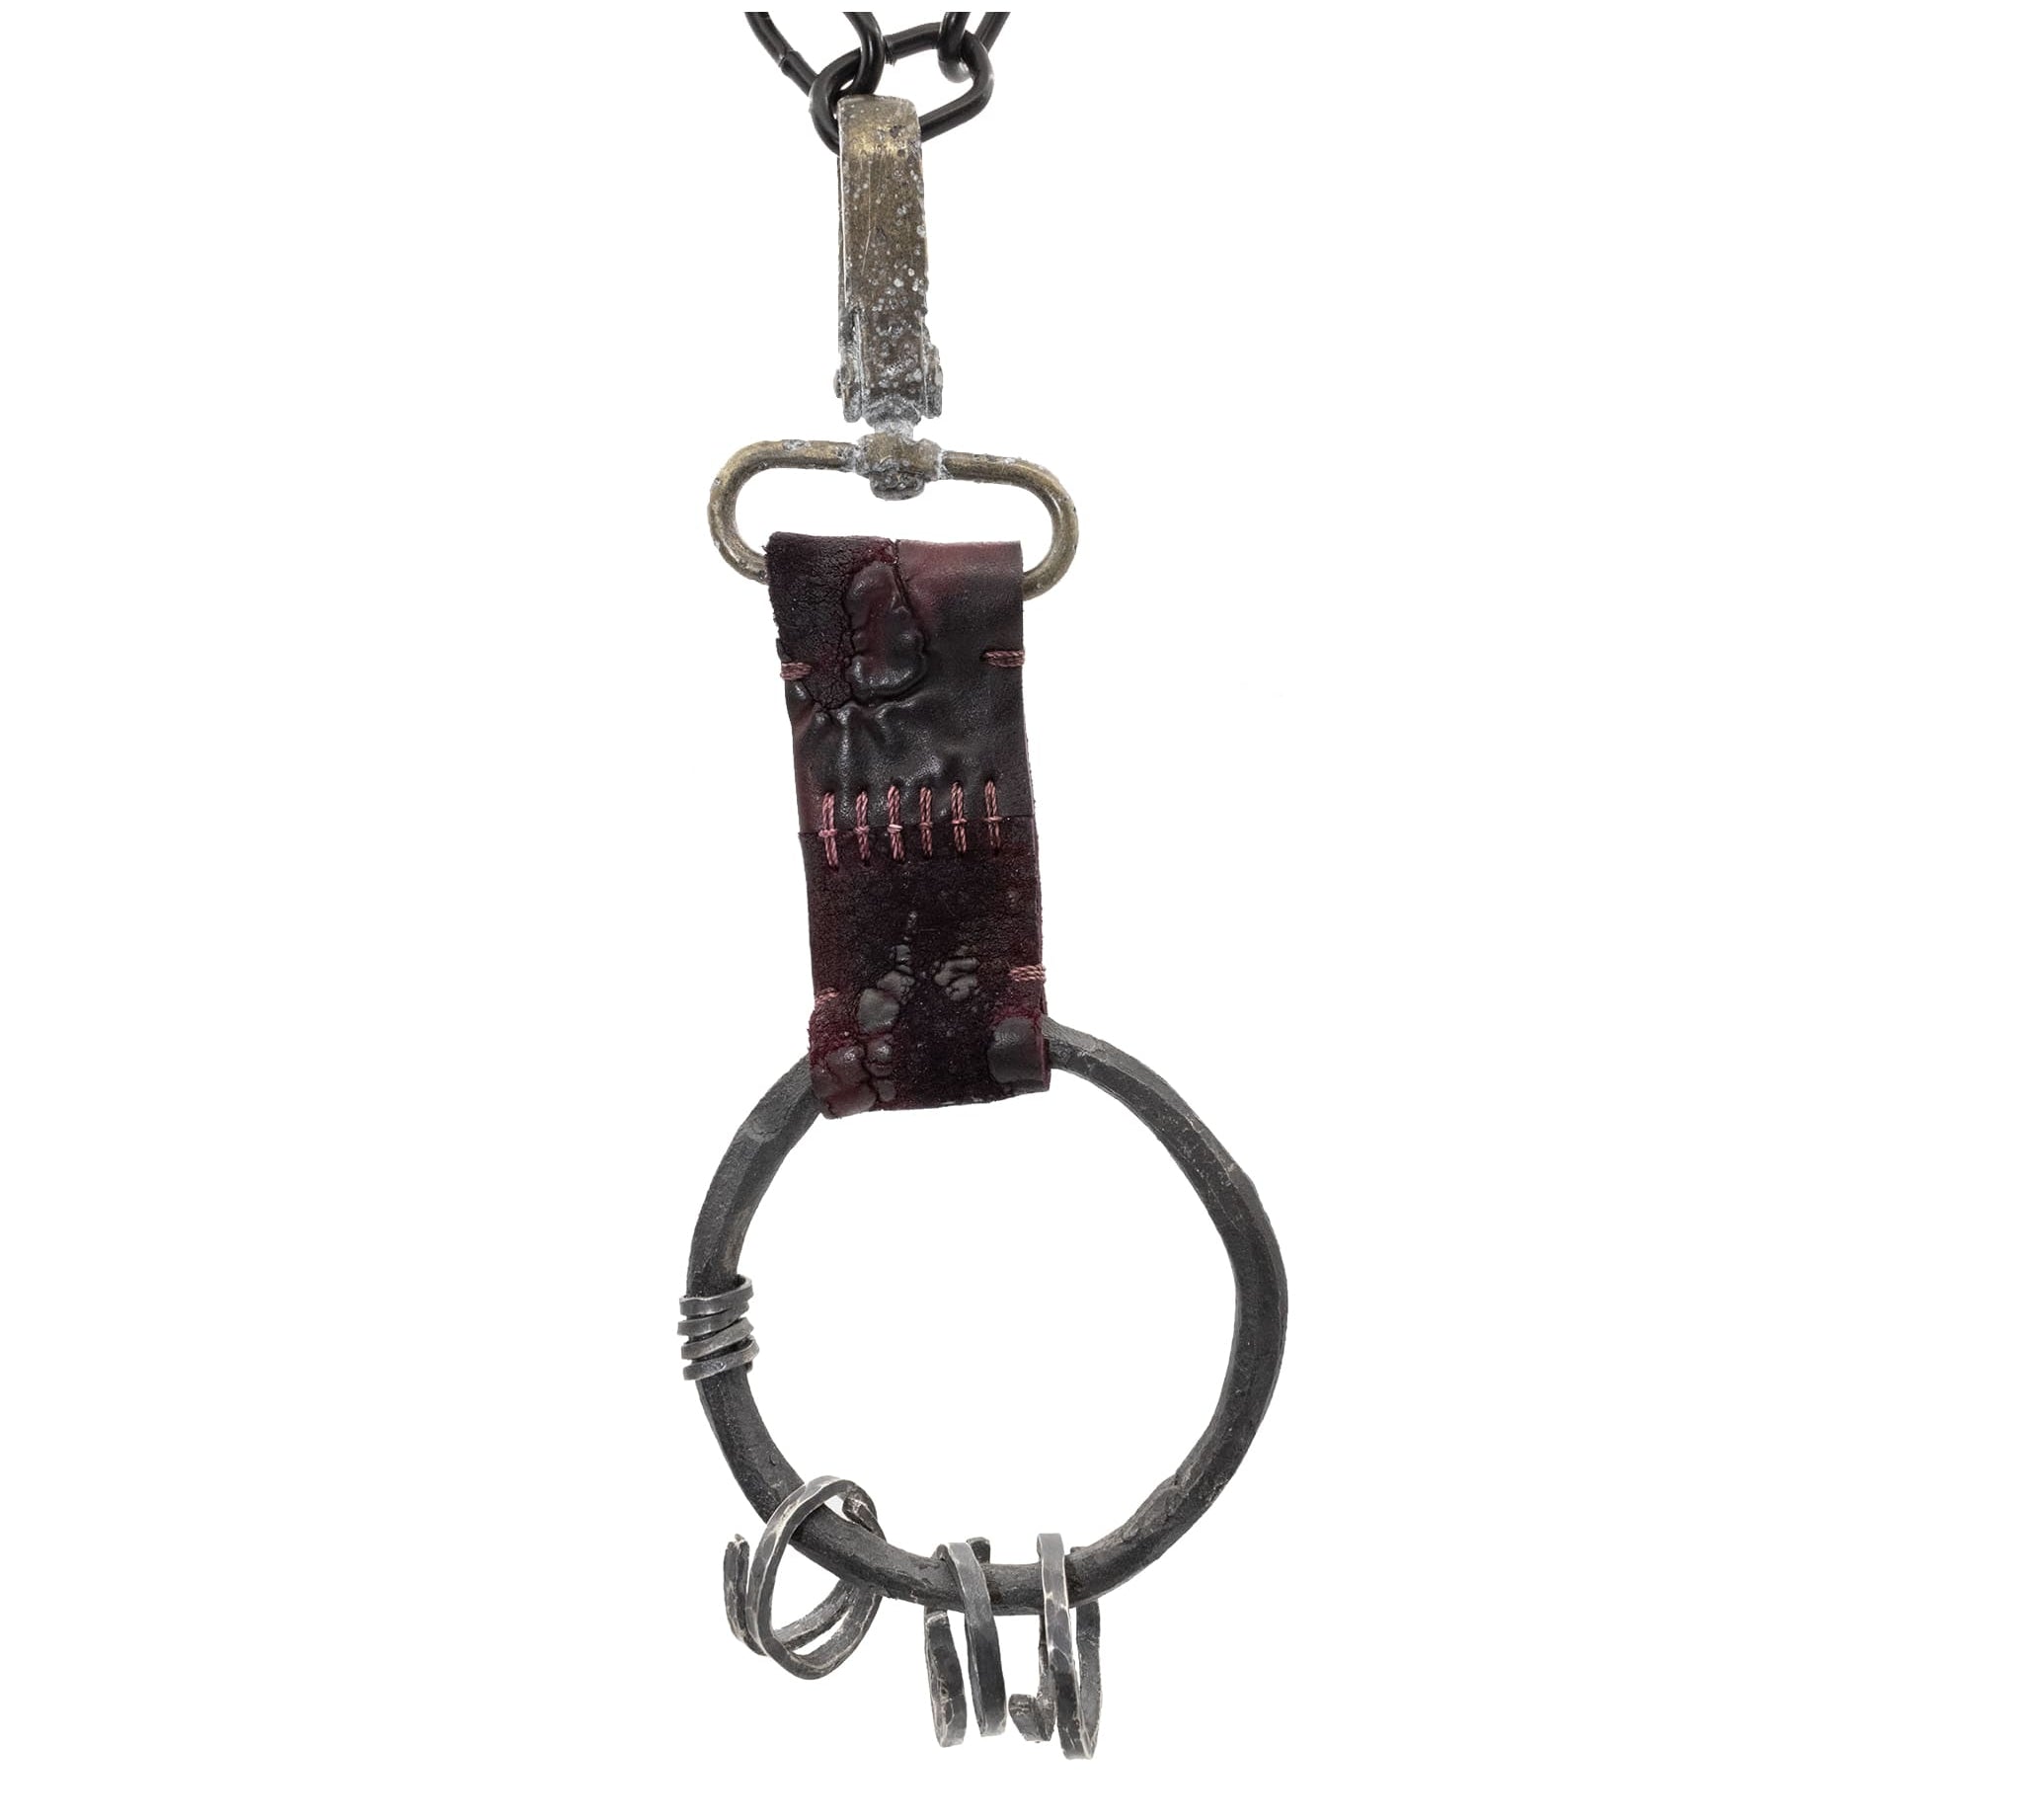 the hand sewn reverse culatta leather prison keys feature a blood red dye treatment and a distressed and corroded swivel clip. a large hand forged black iron ring holds the triple oxidised .925 silver key rings.